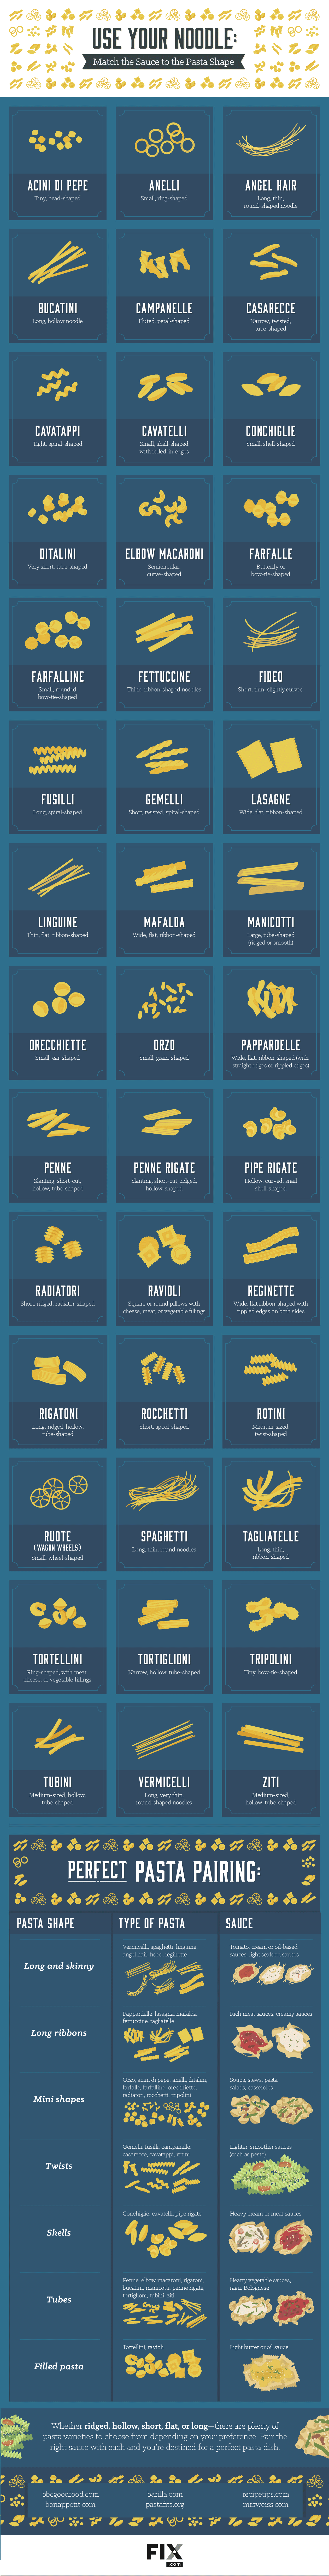 Your Guide To Perfect Pasta And Sauce Combinations Infographic